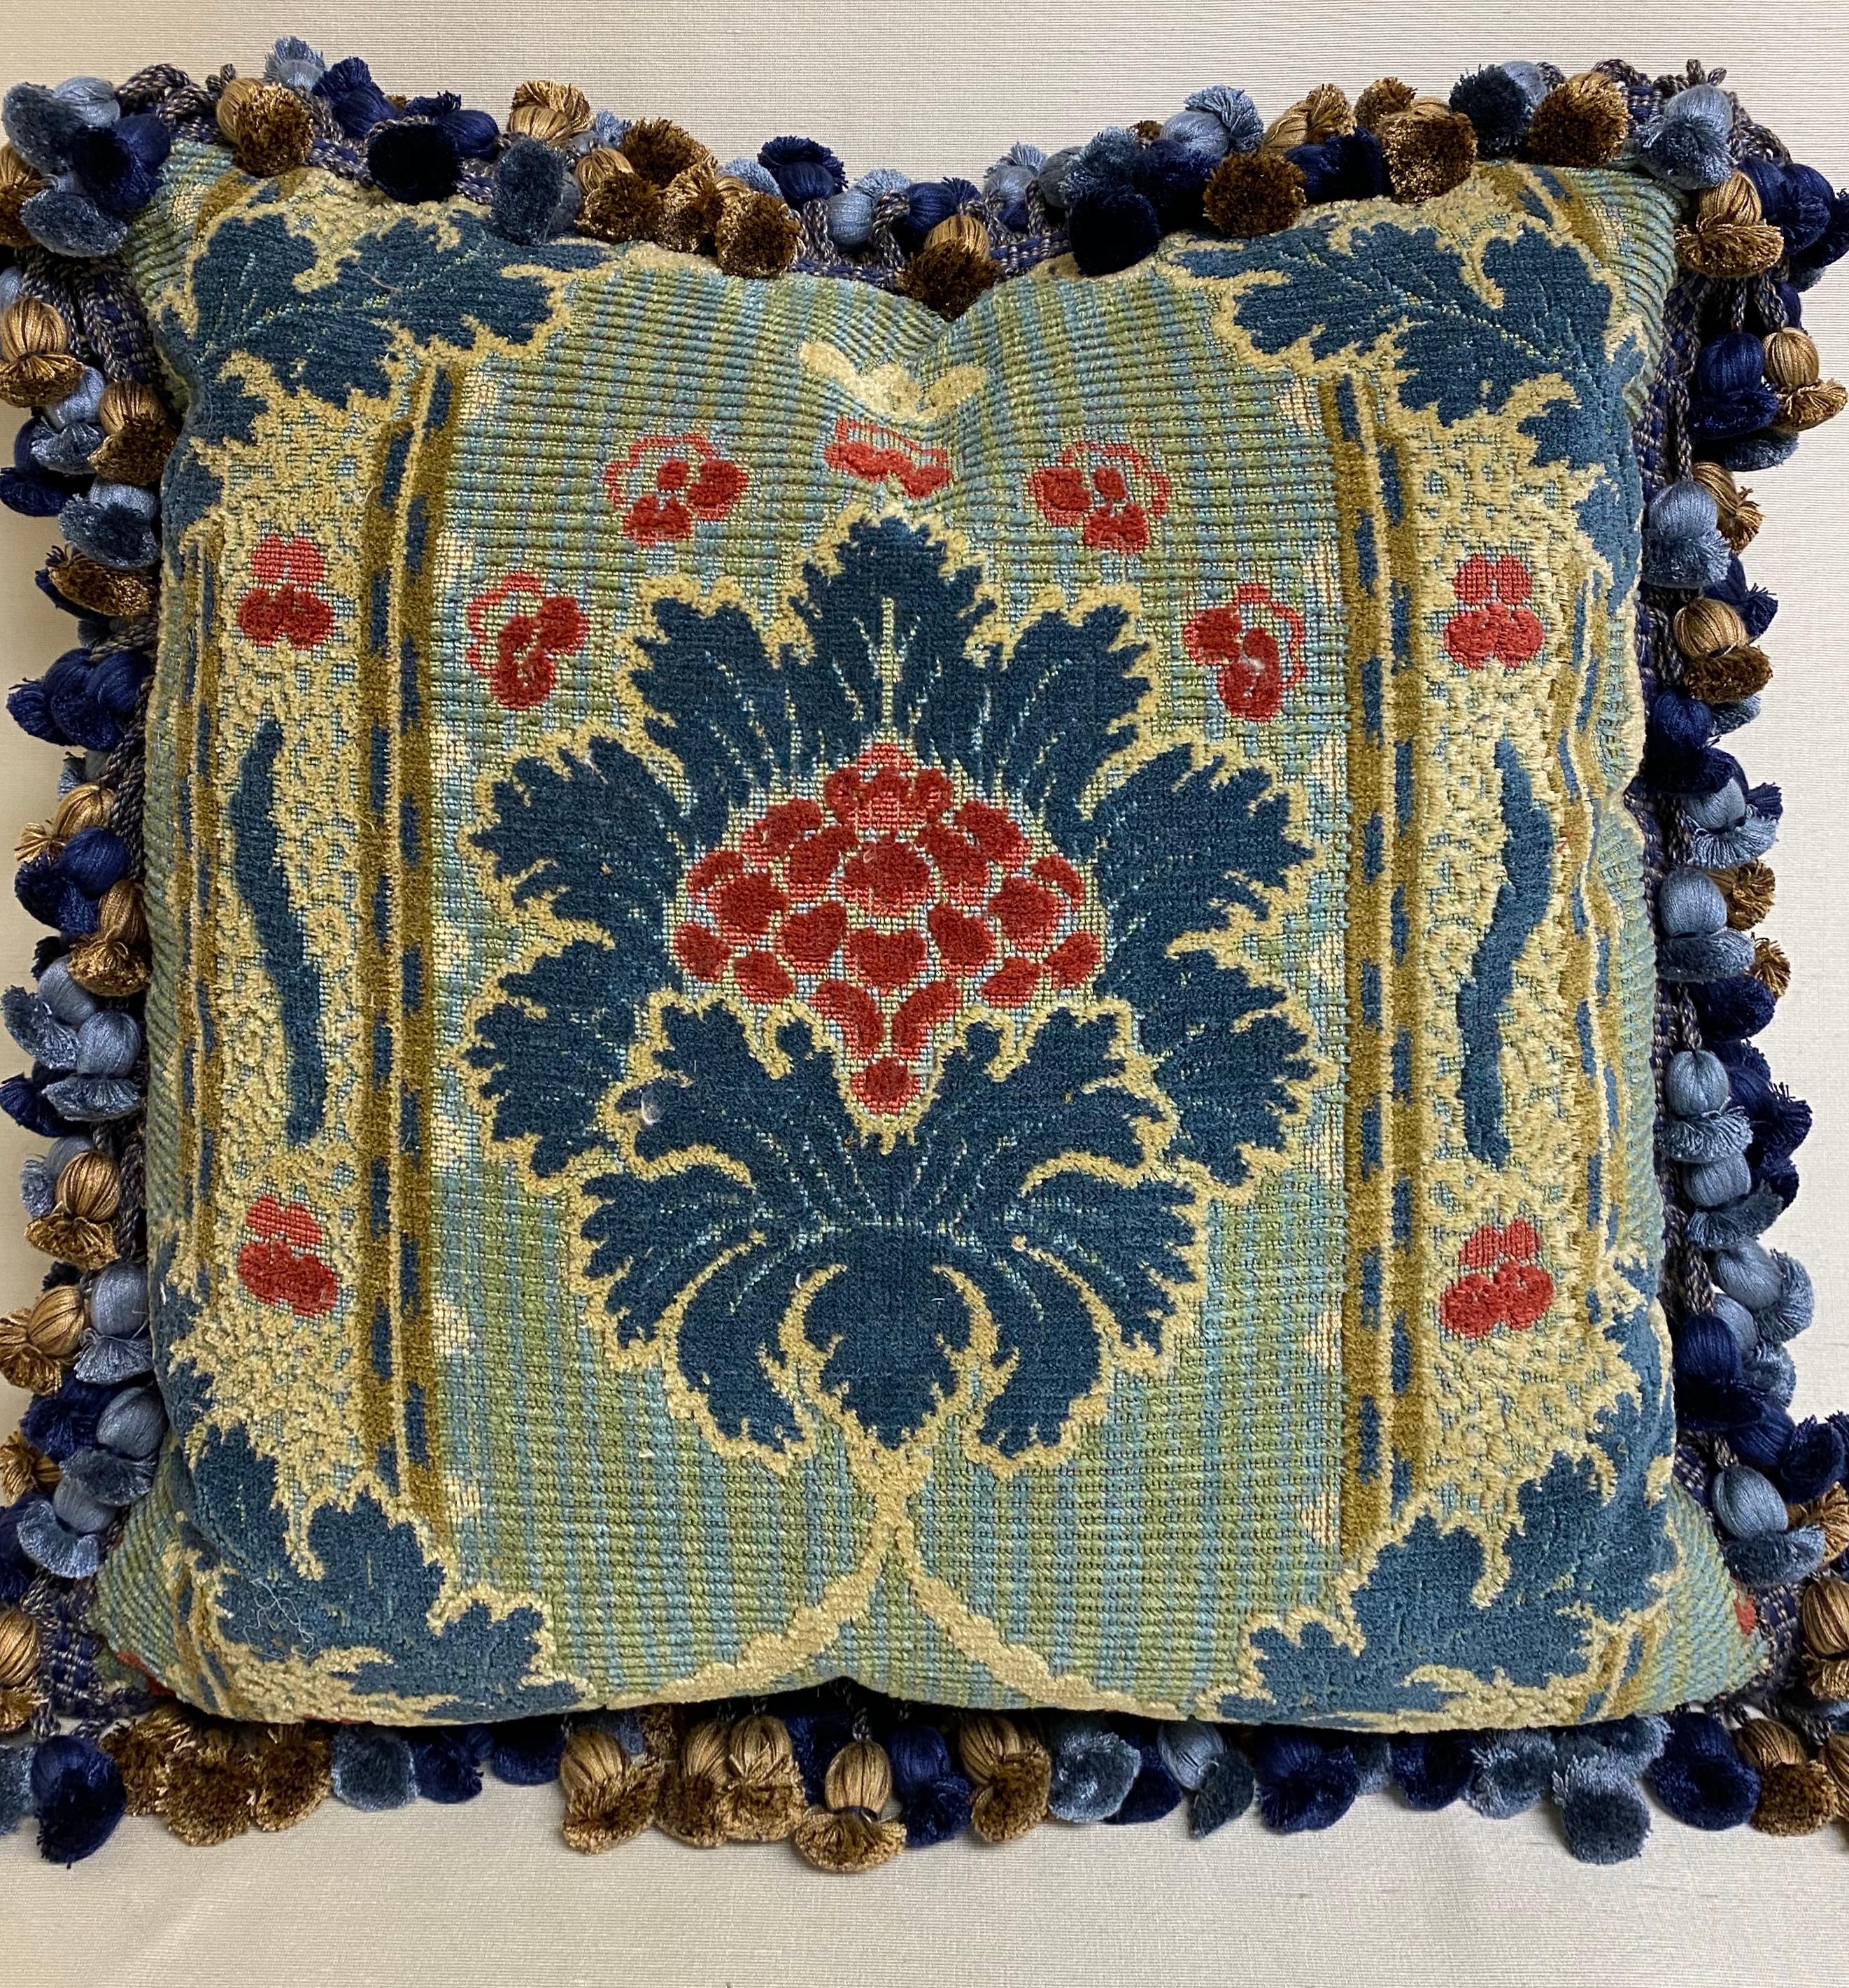 Very decorative pair of down-filled blue floral cushions with red and cream accents and 